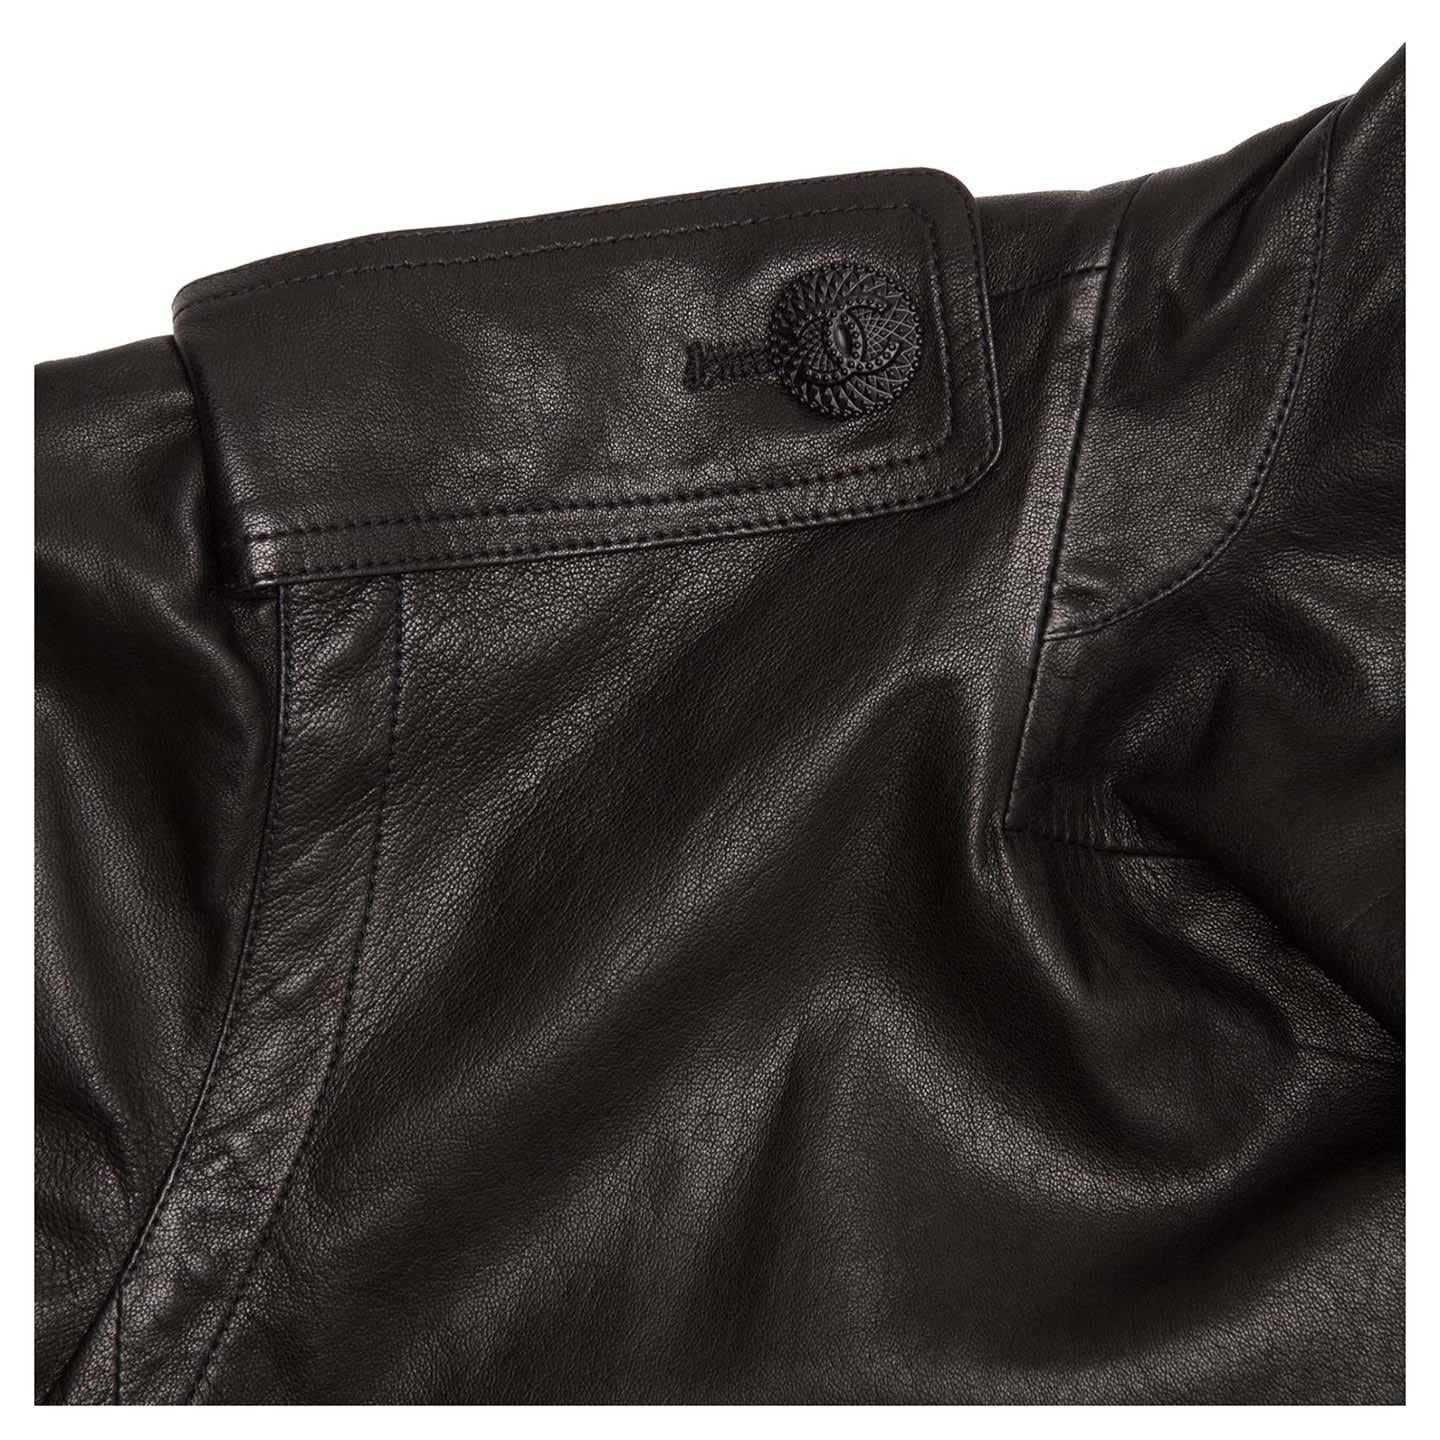 Women's Chanel Black Leather & Lace Moto Style Jacket For Sale